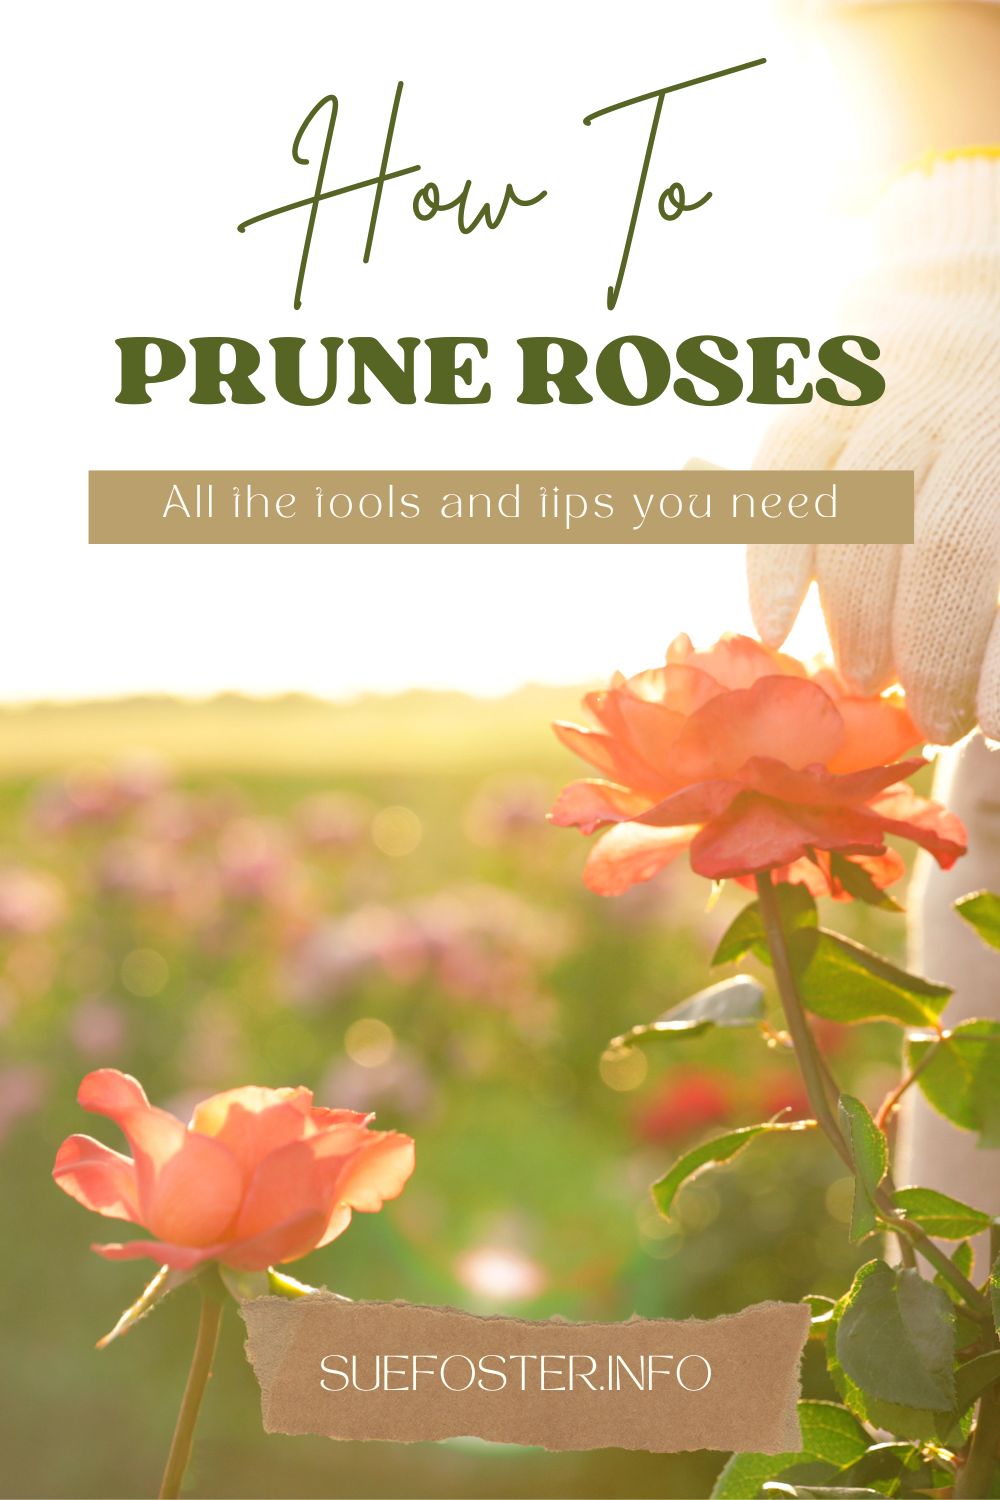 Discover the art of rose pruning with my handy guide. Learn to spot the first signs of spring growth and understand the best timing for trimming your bushes to ensure a flourishing rose garden.